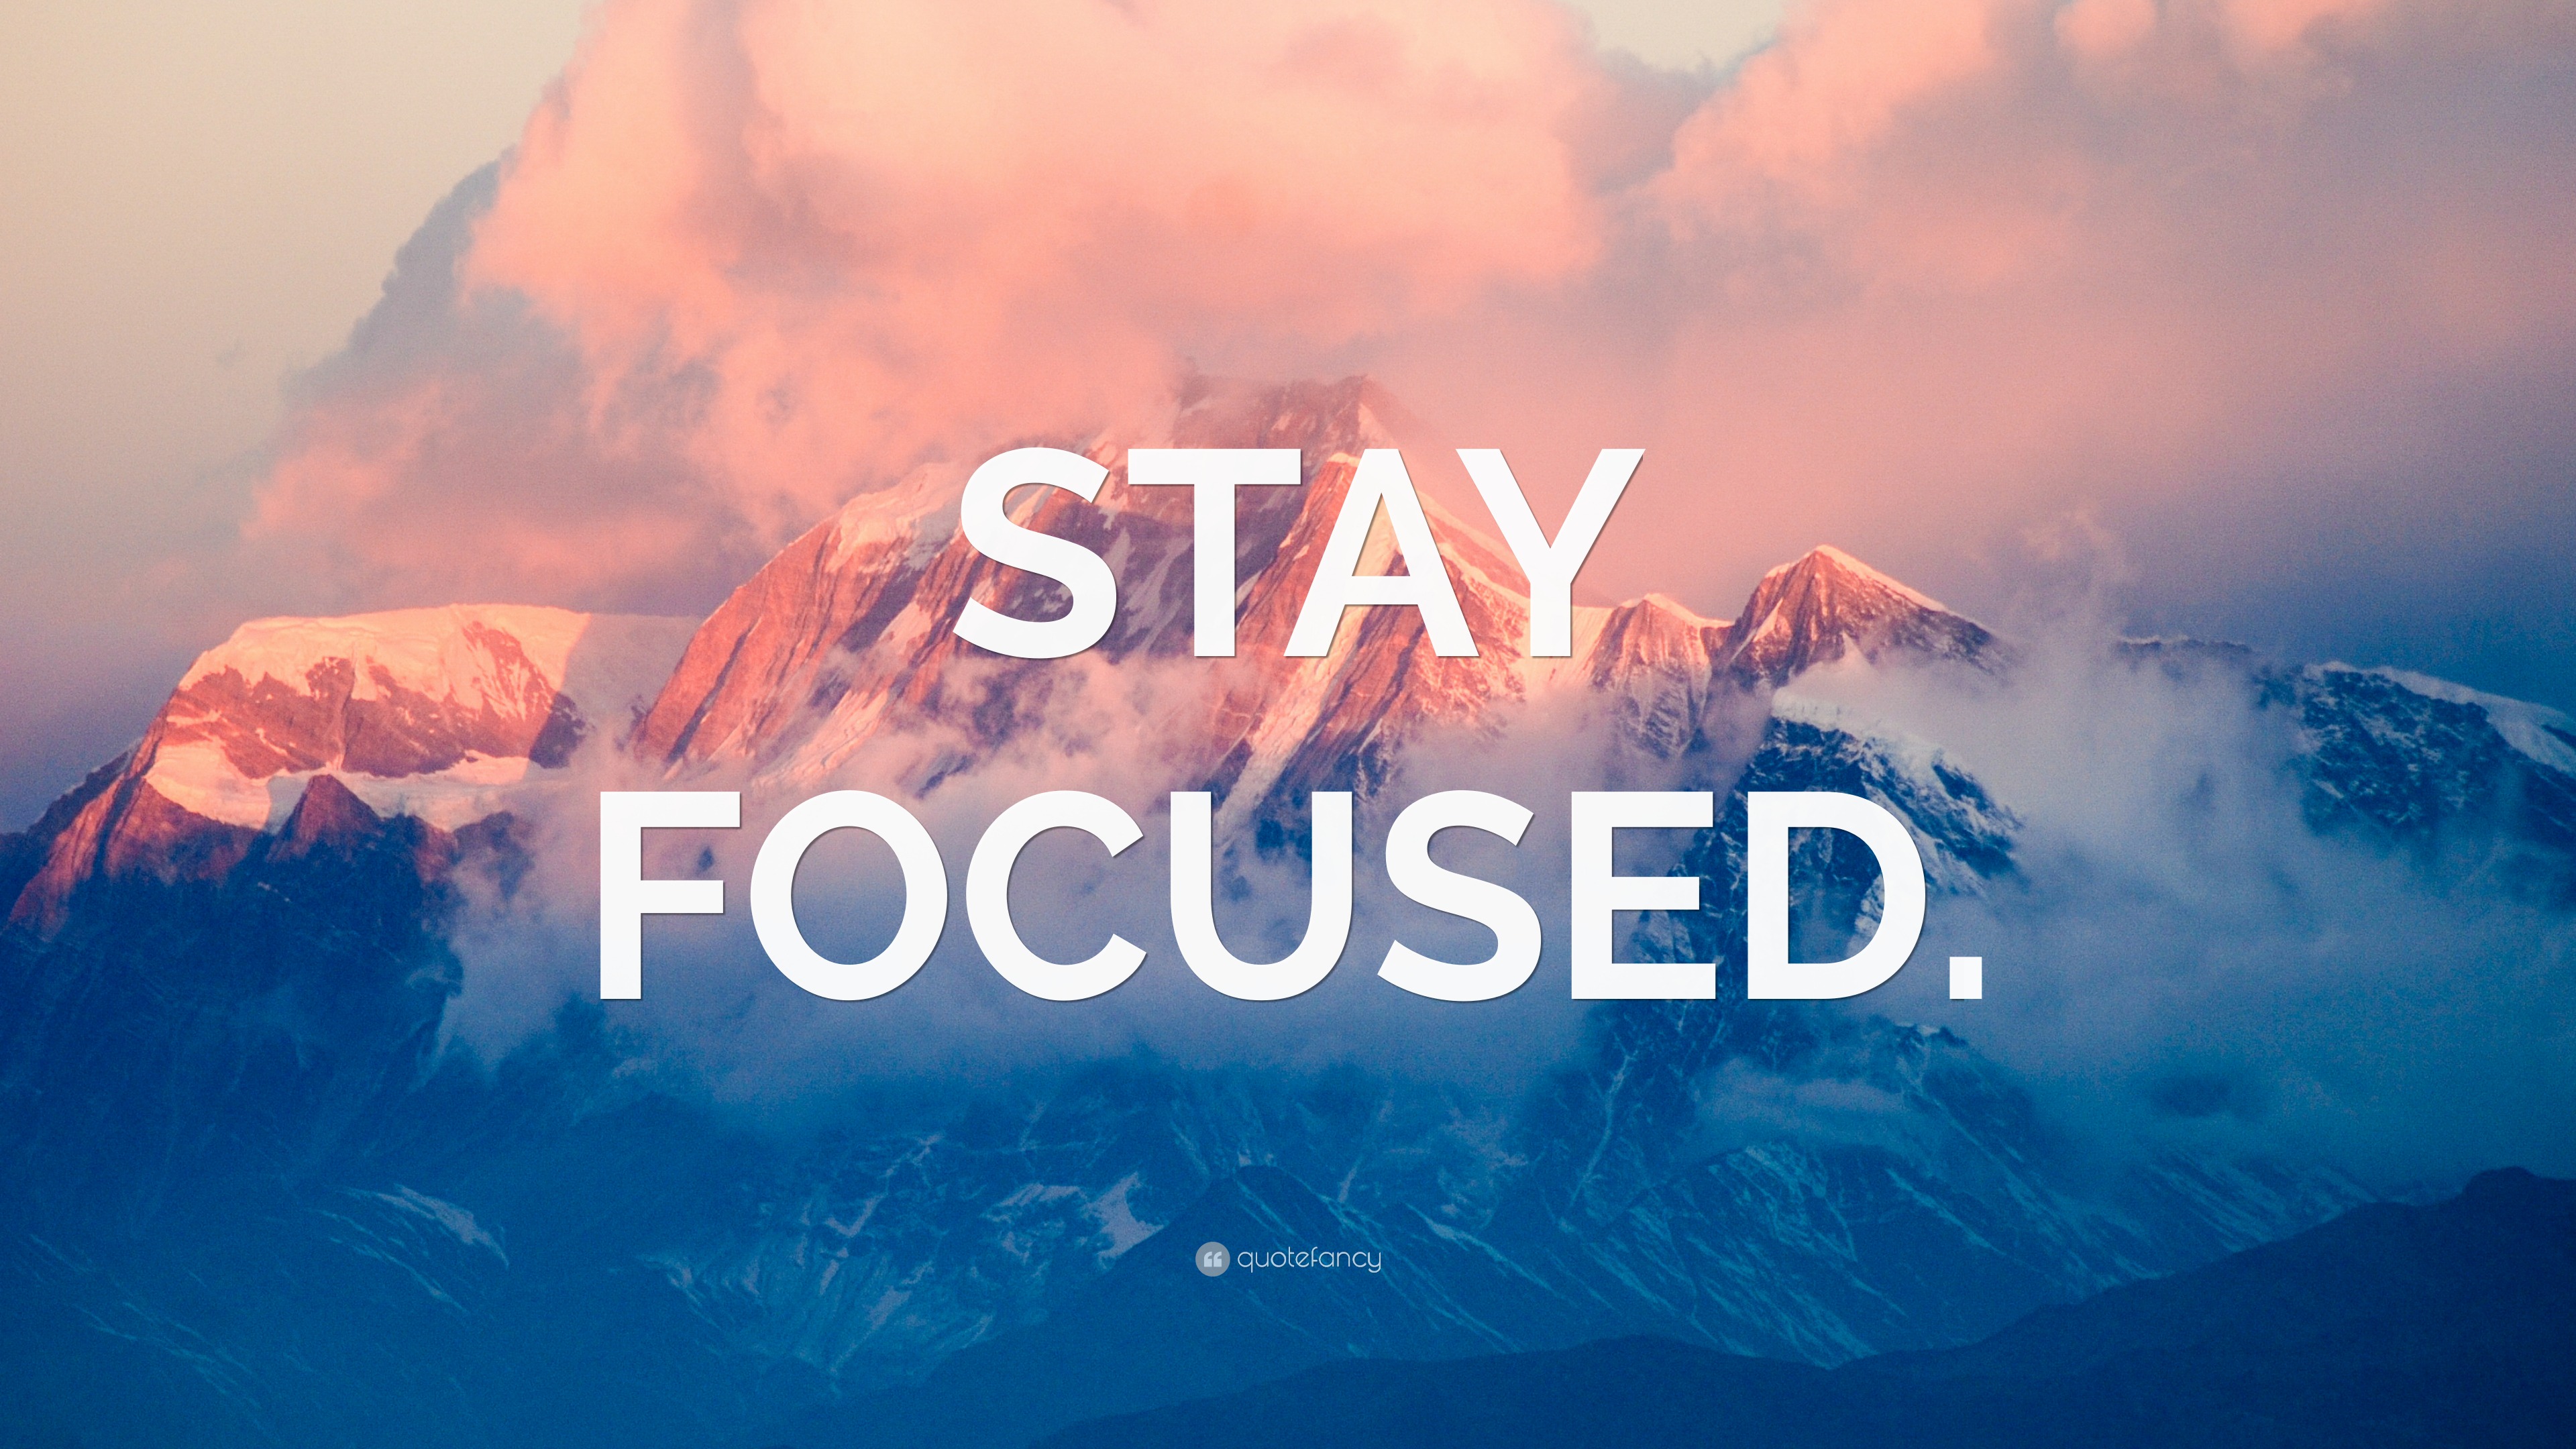 “STAY FOCUSED.” Wallpaper by QuoteFancy